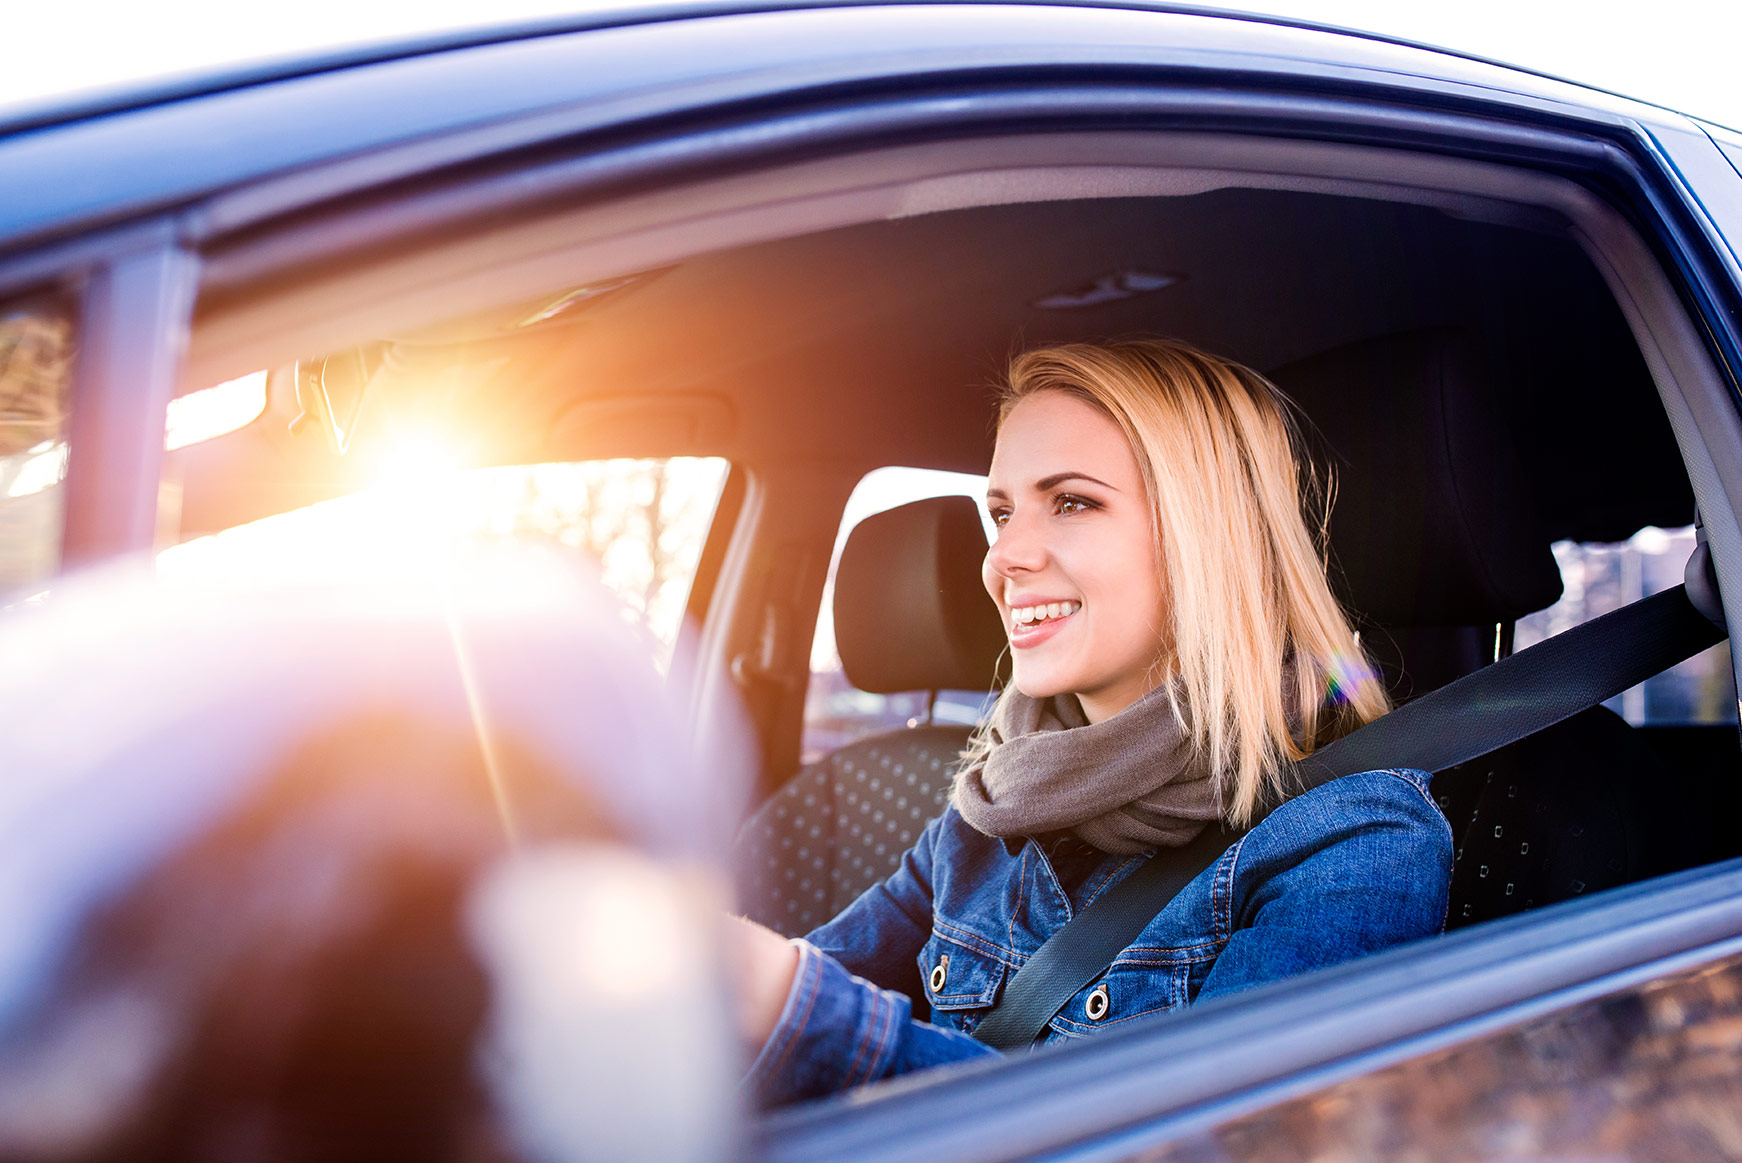 Safety Behind the Wheel: Tips for Your Summer Drive